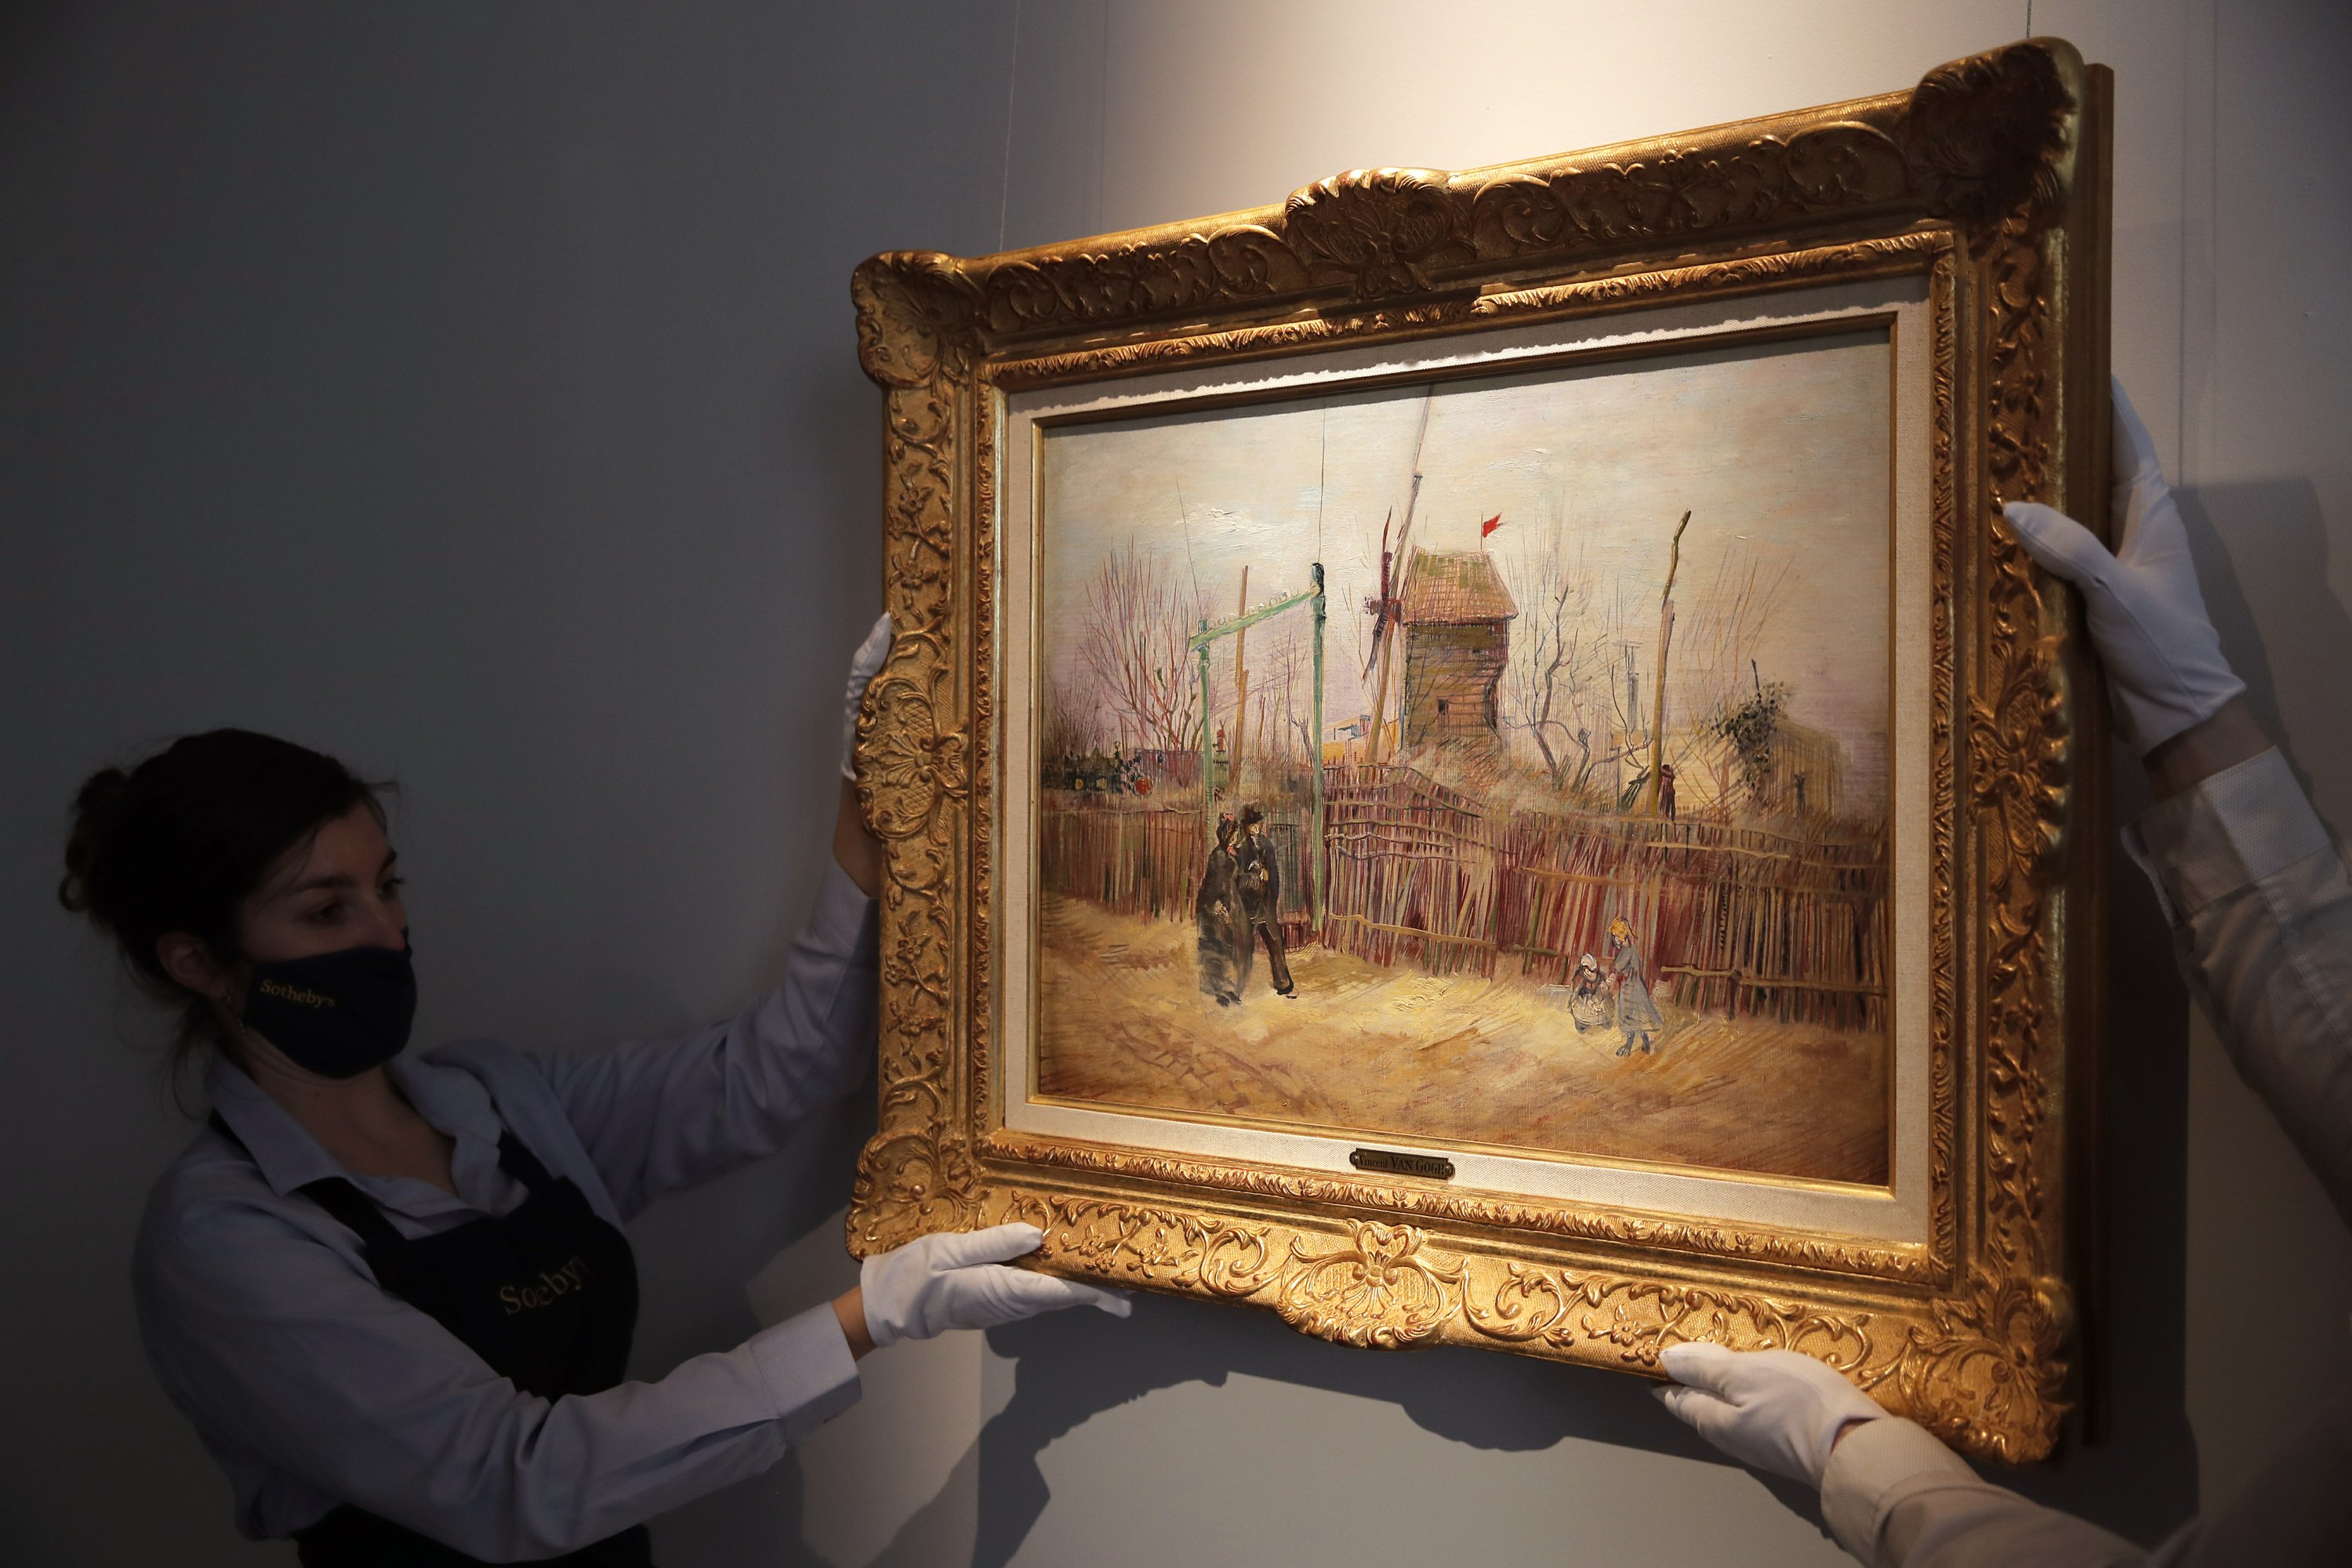 Van Gogh’s painting was rarely exhibited before the auction